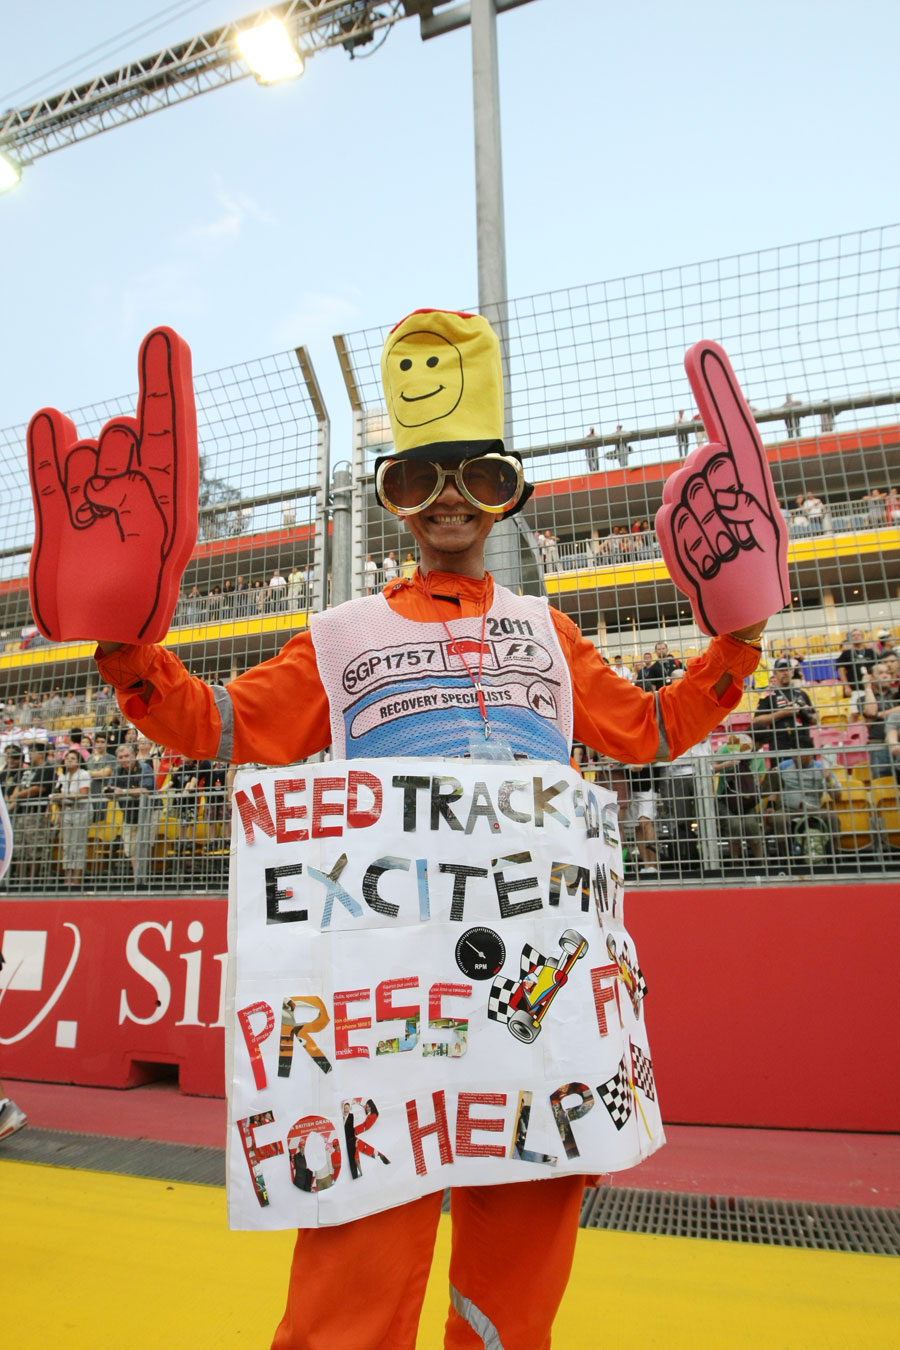 A track marshal dresses up before the race